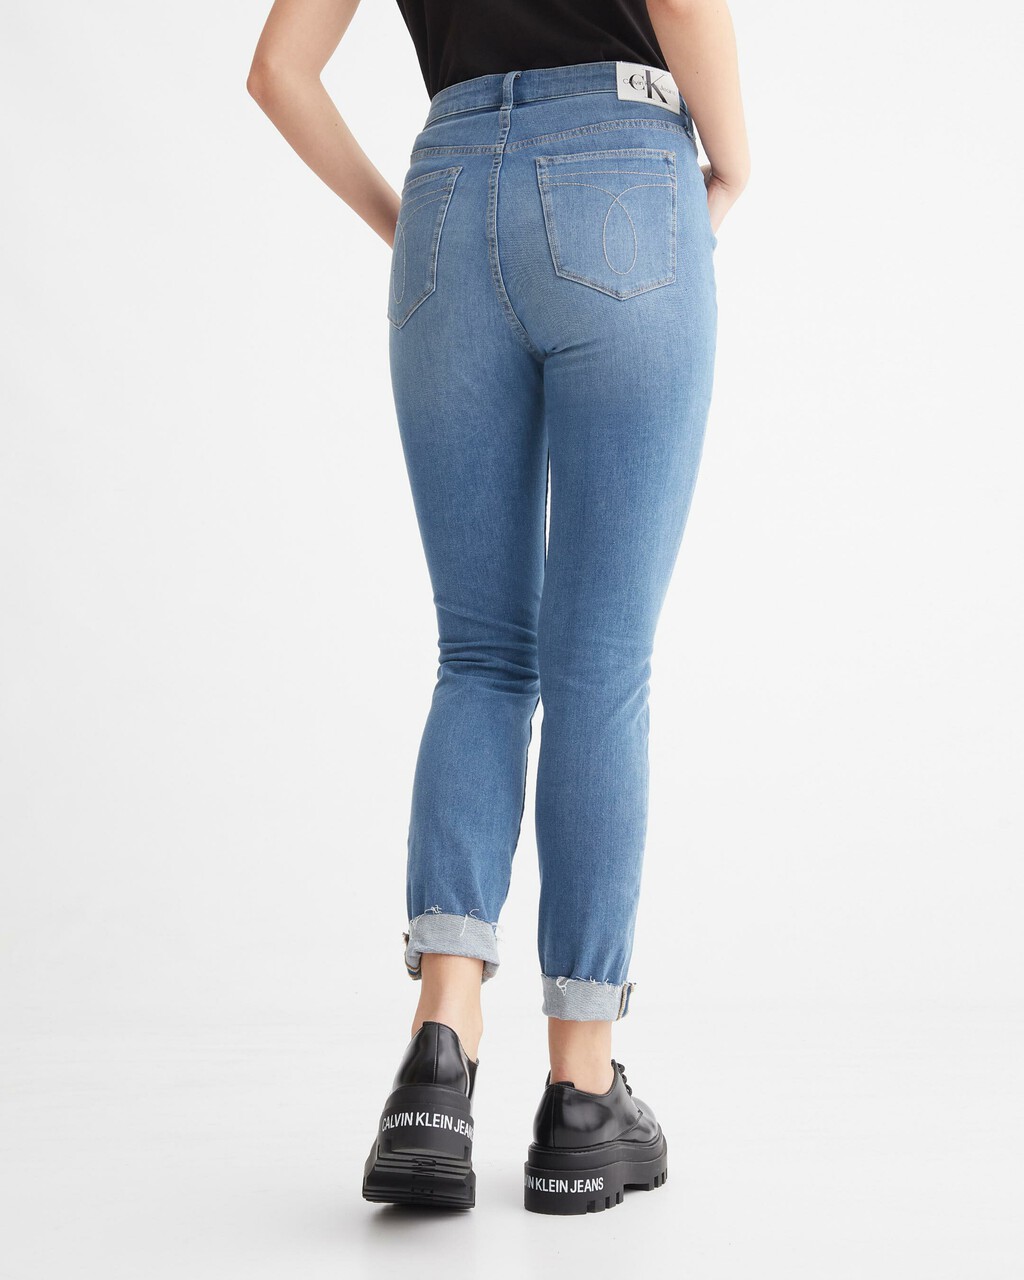 ULTIMATE STRETCH HIGH RISE SKINNY ANKLE JEANS, Bright Blue Embro Raw Hem, hi-res